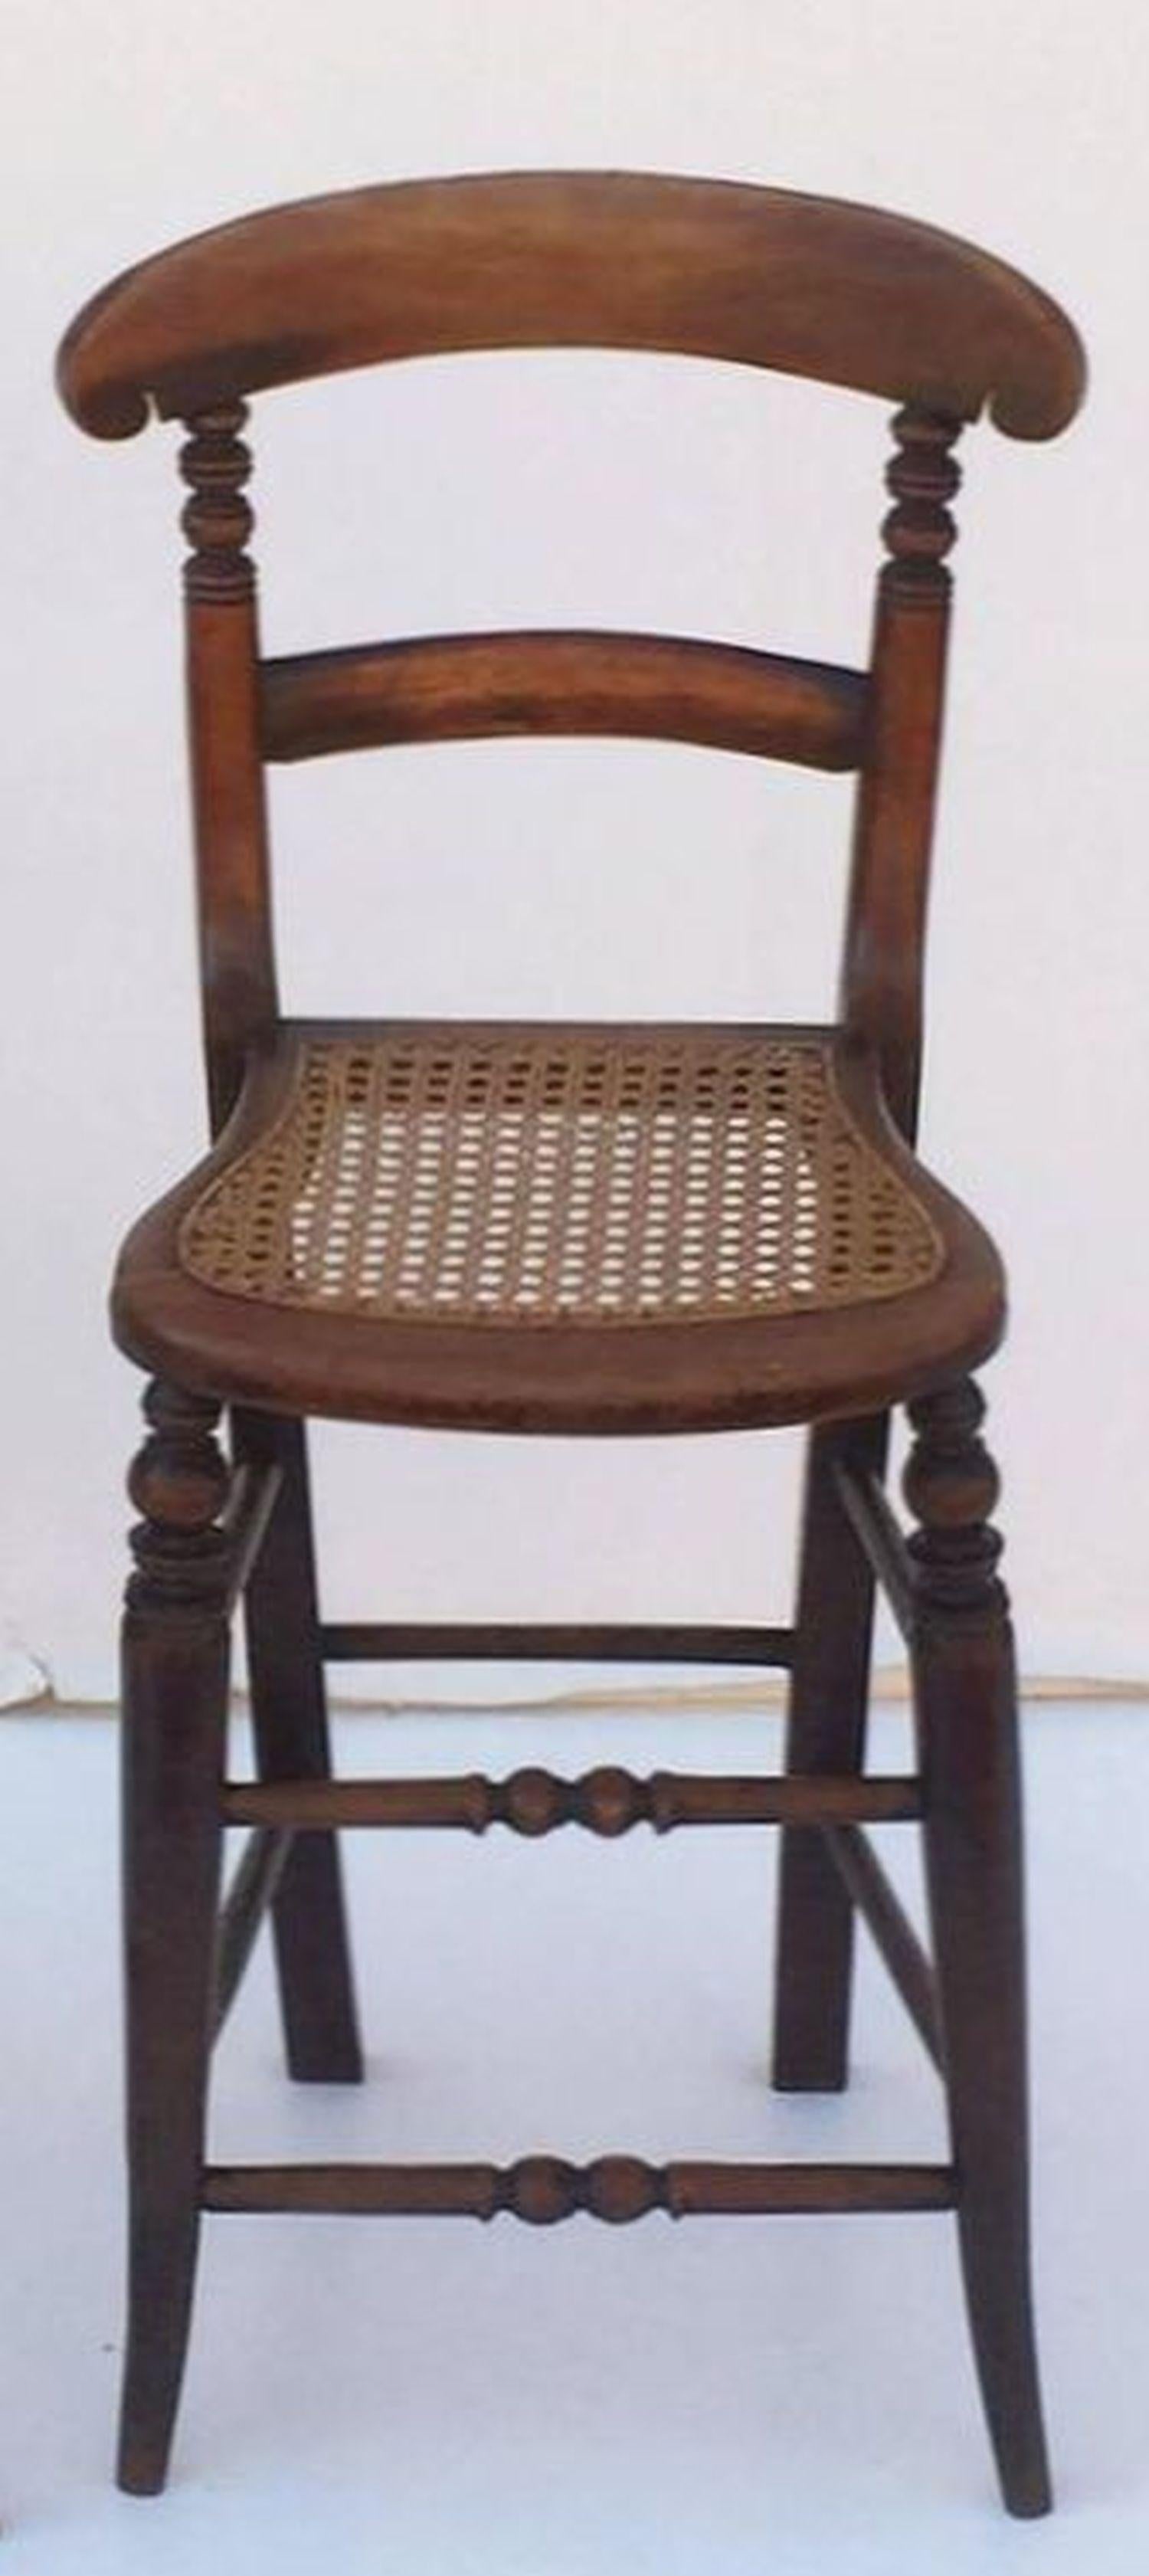 A handsome English children's correction chair from the Georgian era, featuring a bowed back and turned supports with Fine patination to the wood, and a shaped caned seat in excellent antique condition.

These deportment or correction chairs are